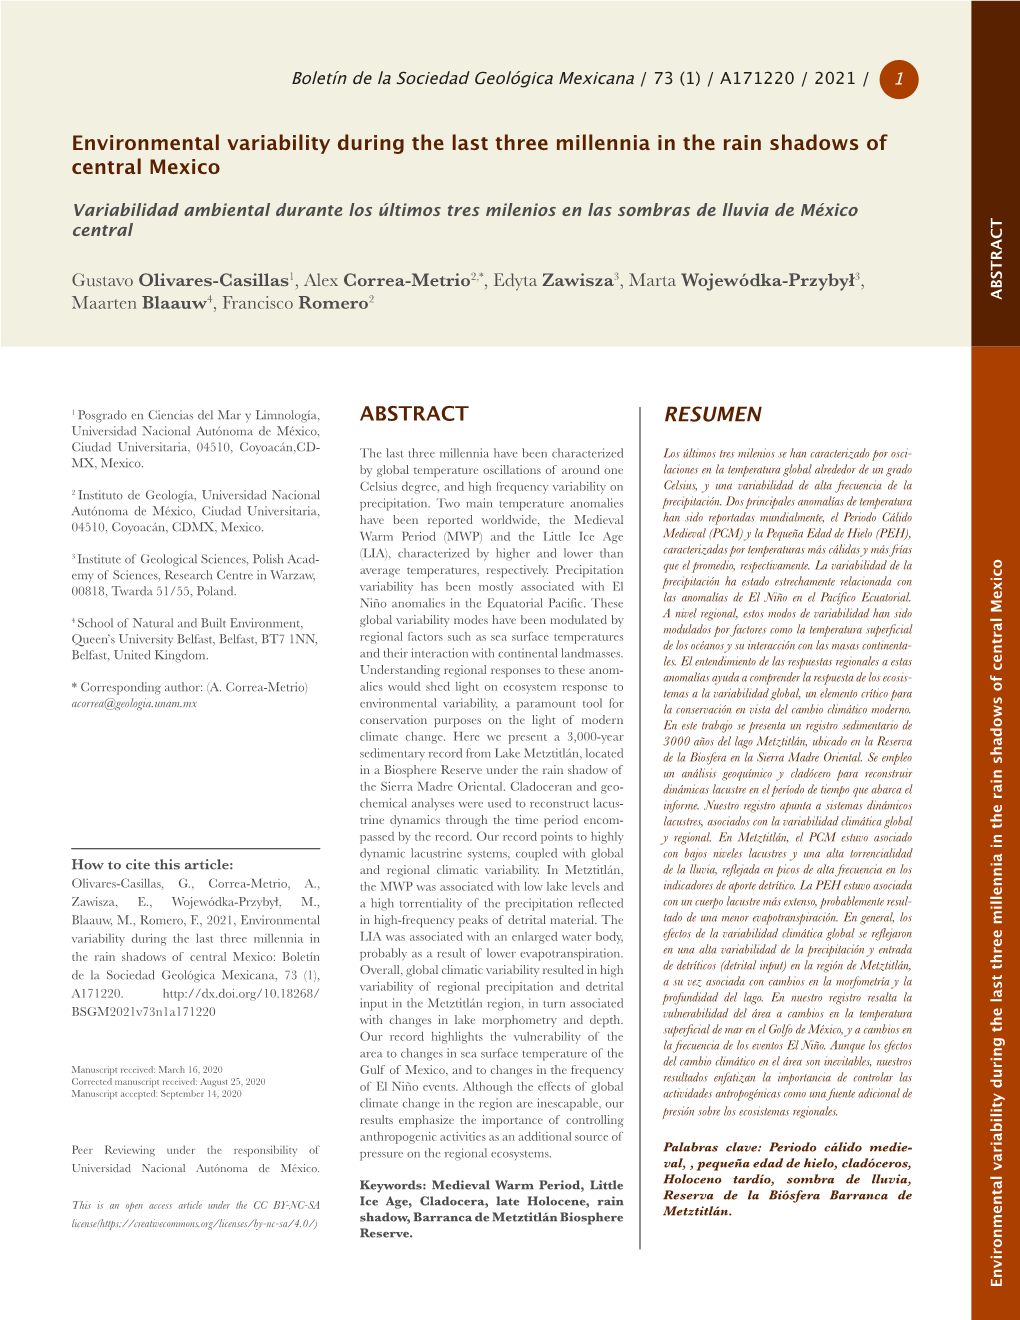 RESUMEN ABSTRACT Environmental Variability During the Last Three Millennia in the Rain Shadows of Central Mexico